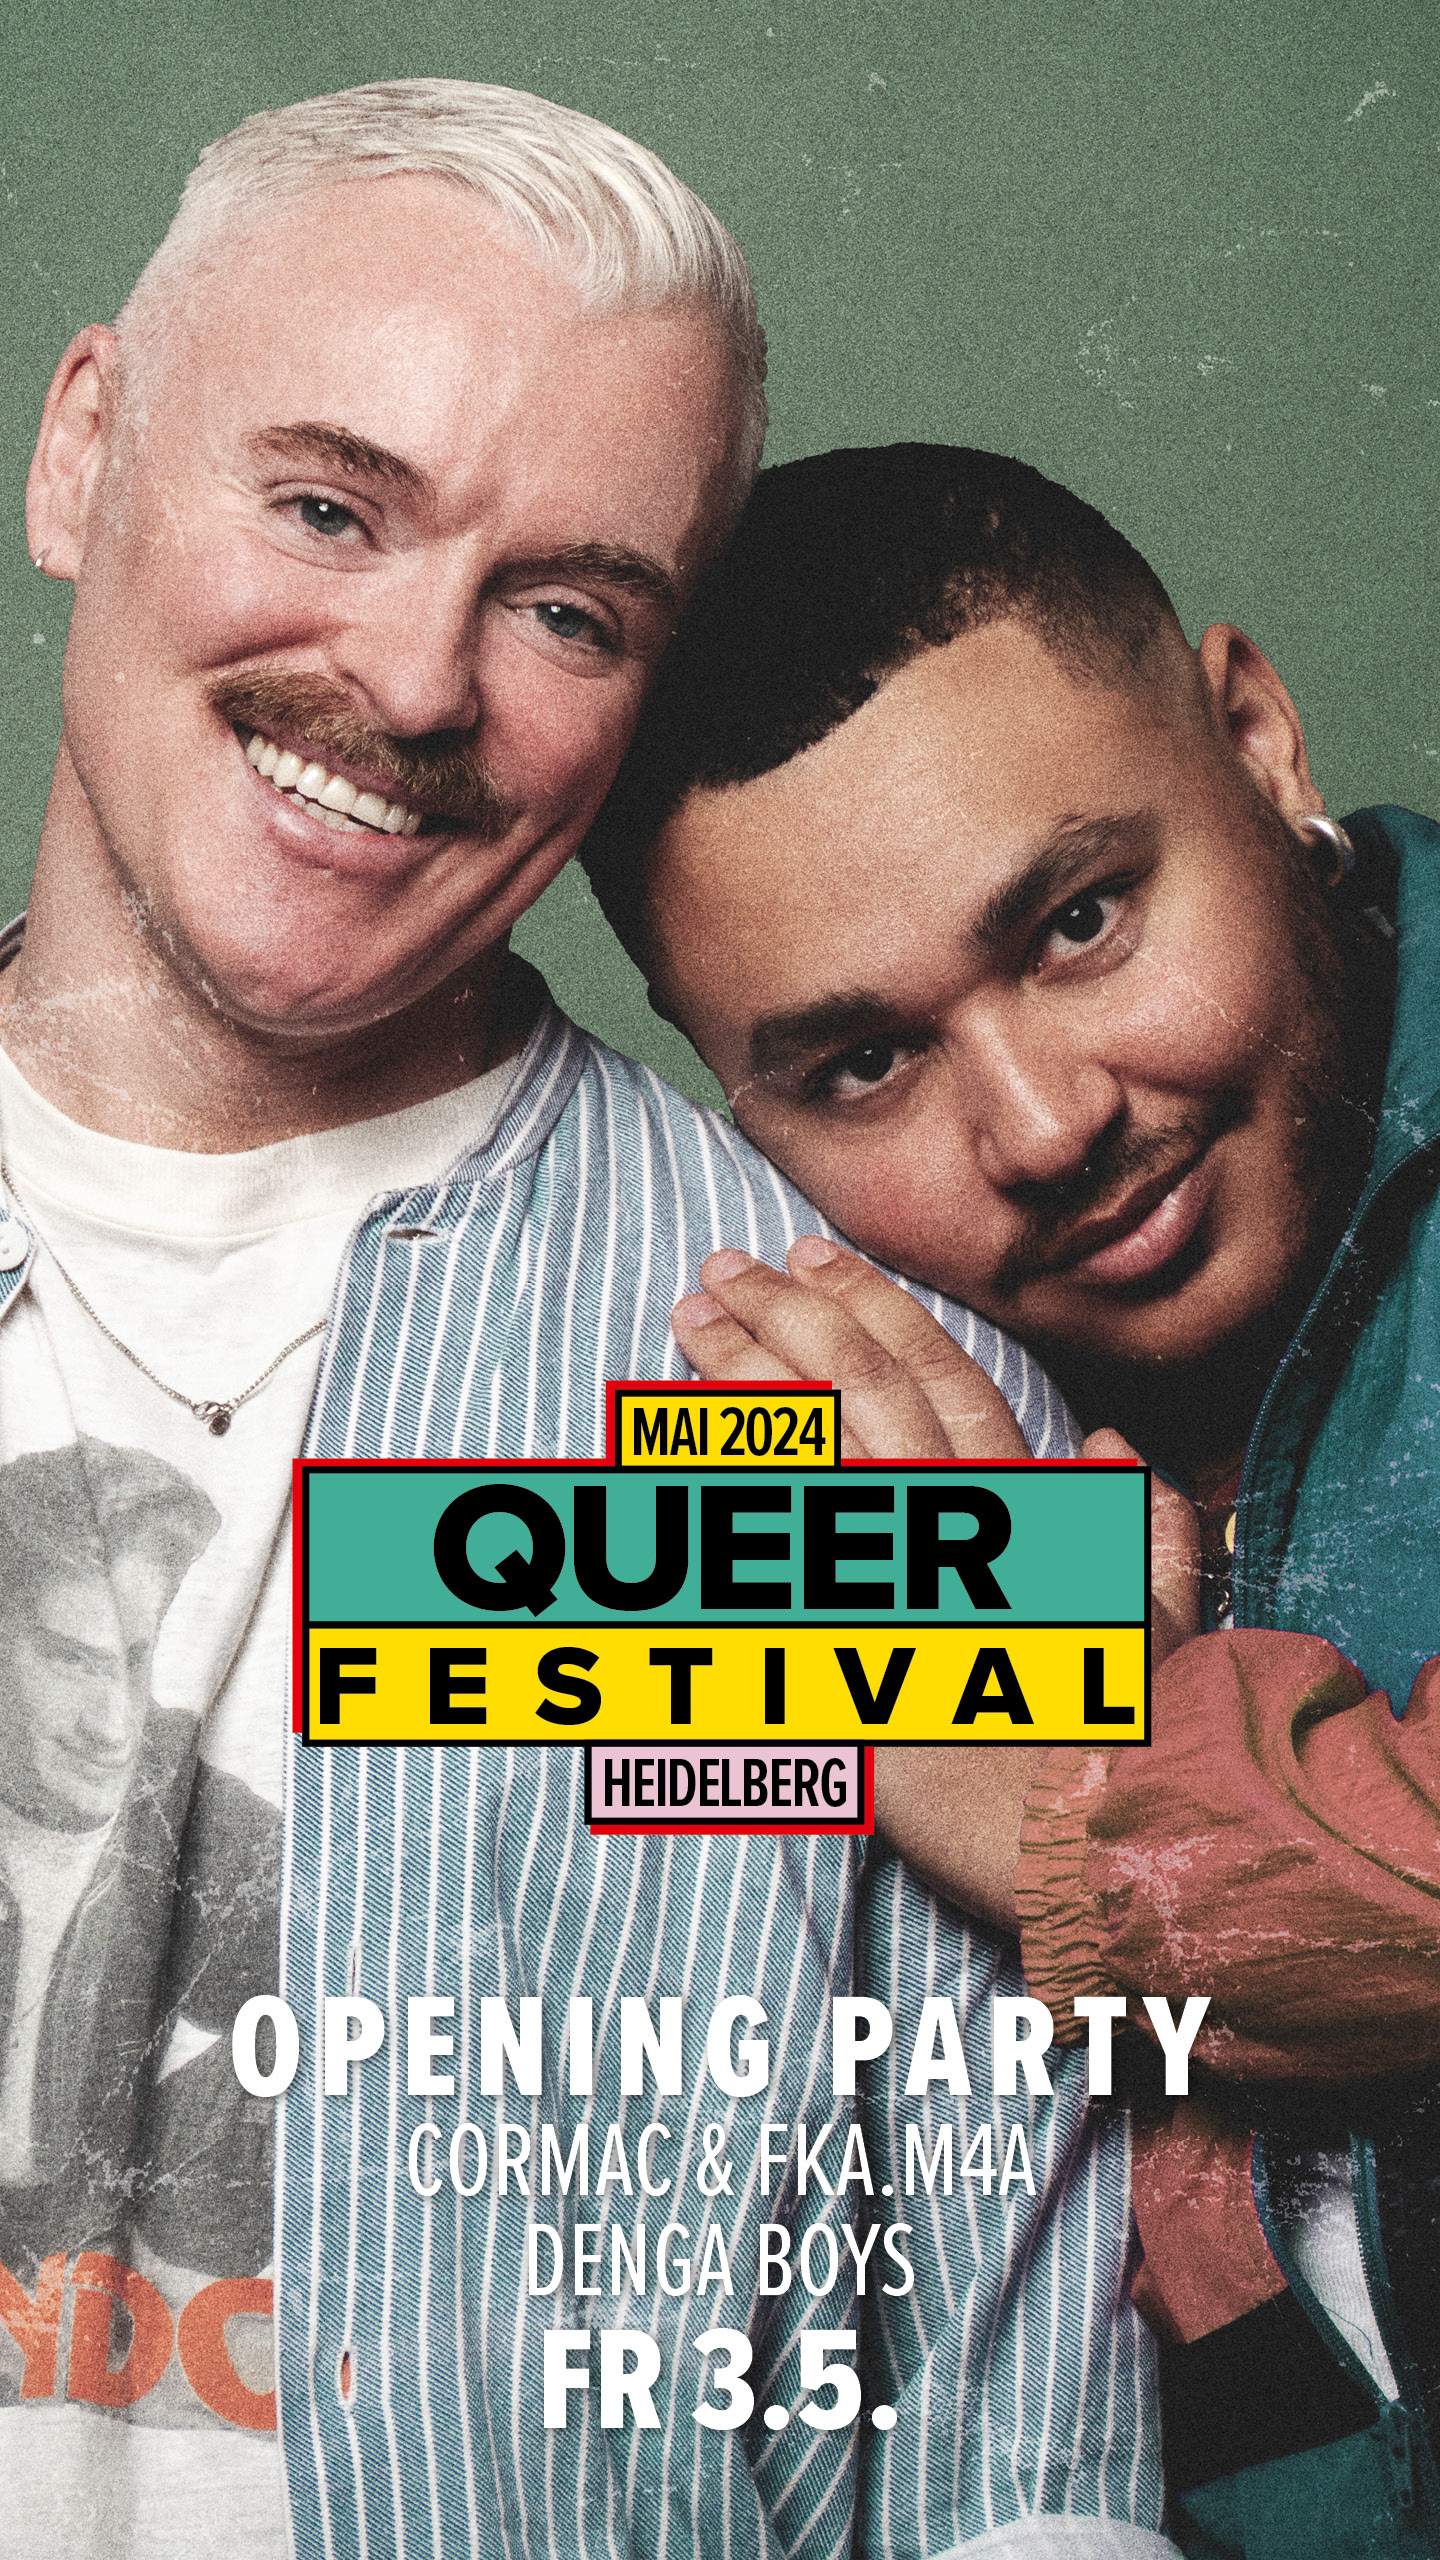 Queer Festival Opening Party with Cormac b2b fka.m4a & Denga Boys - Página frontal